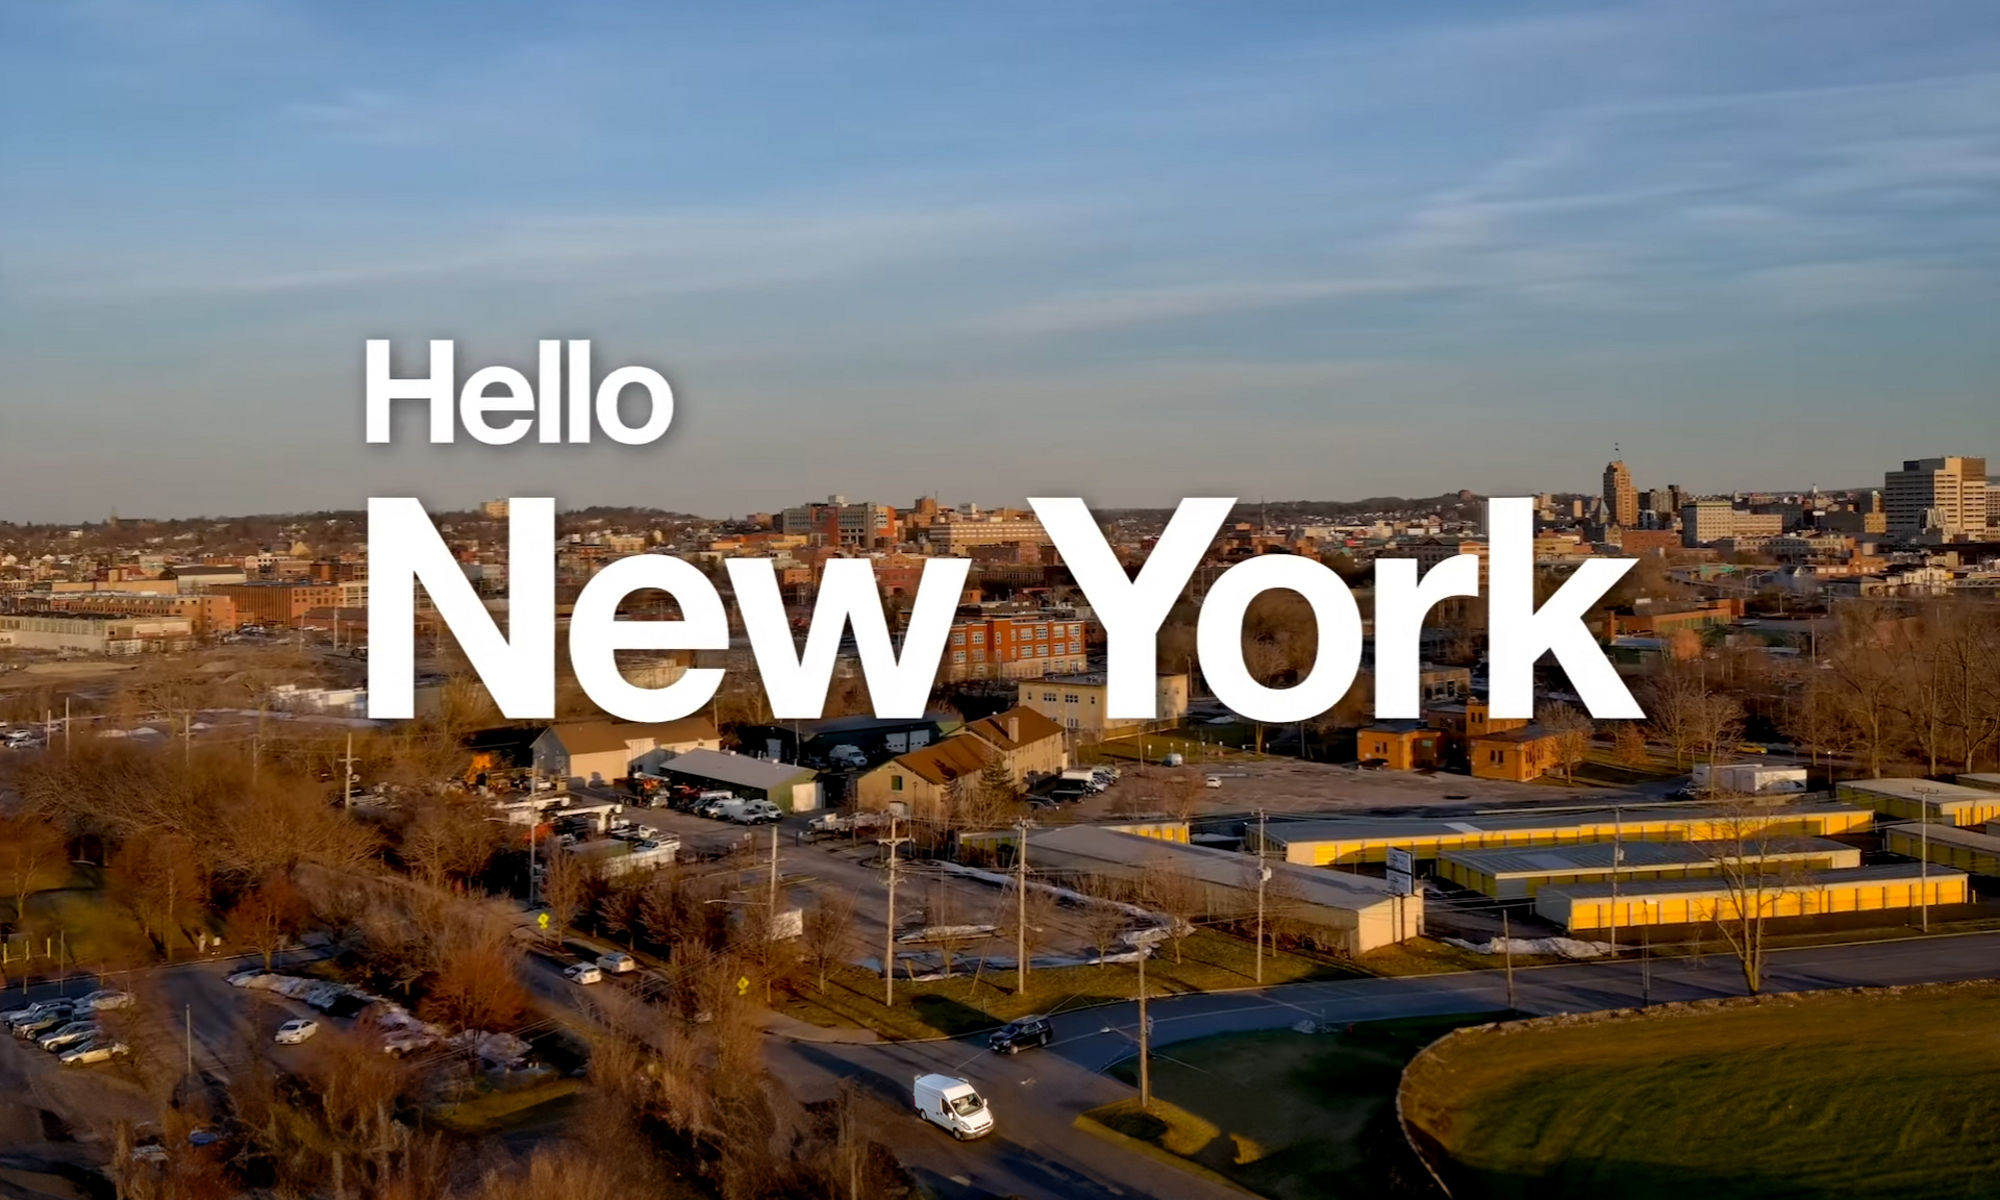 Skyline of Clay, NY with the words "Hello New York" overlayed on top.